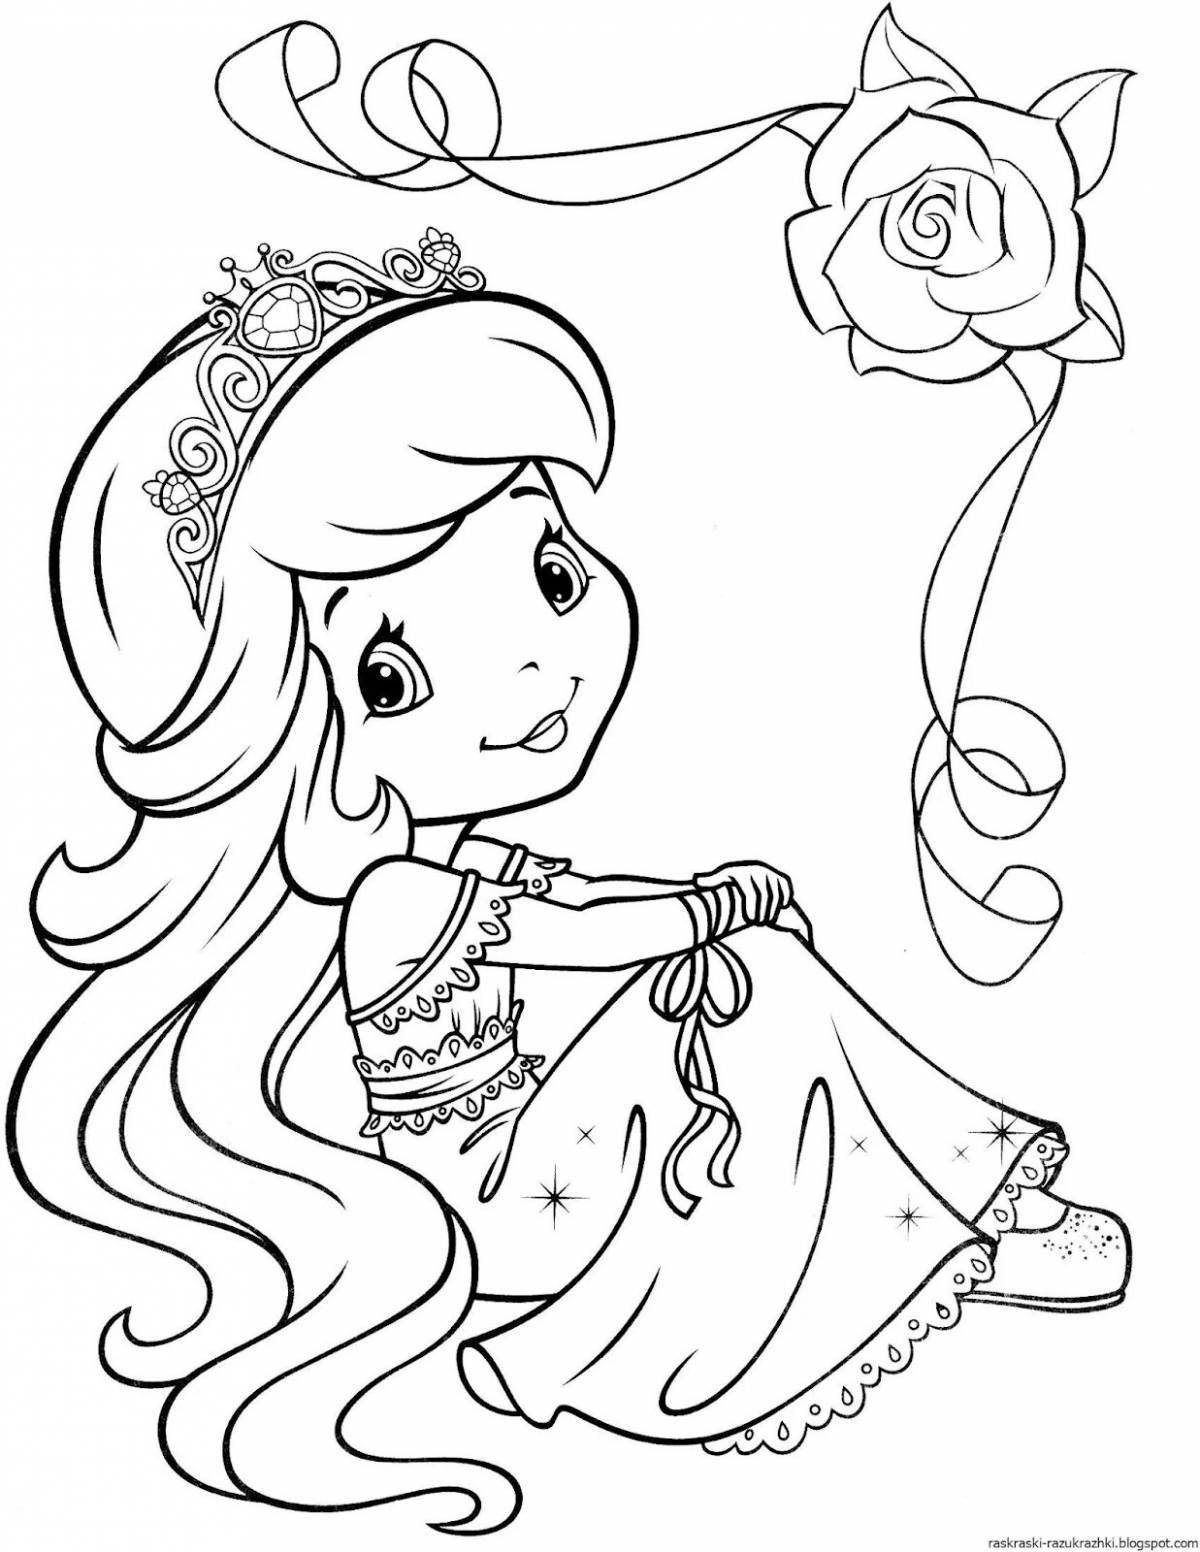 Sparkling coloring book for a 5 year old girl